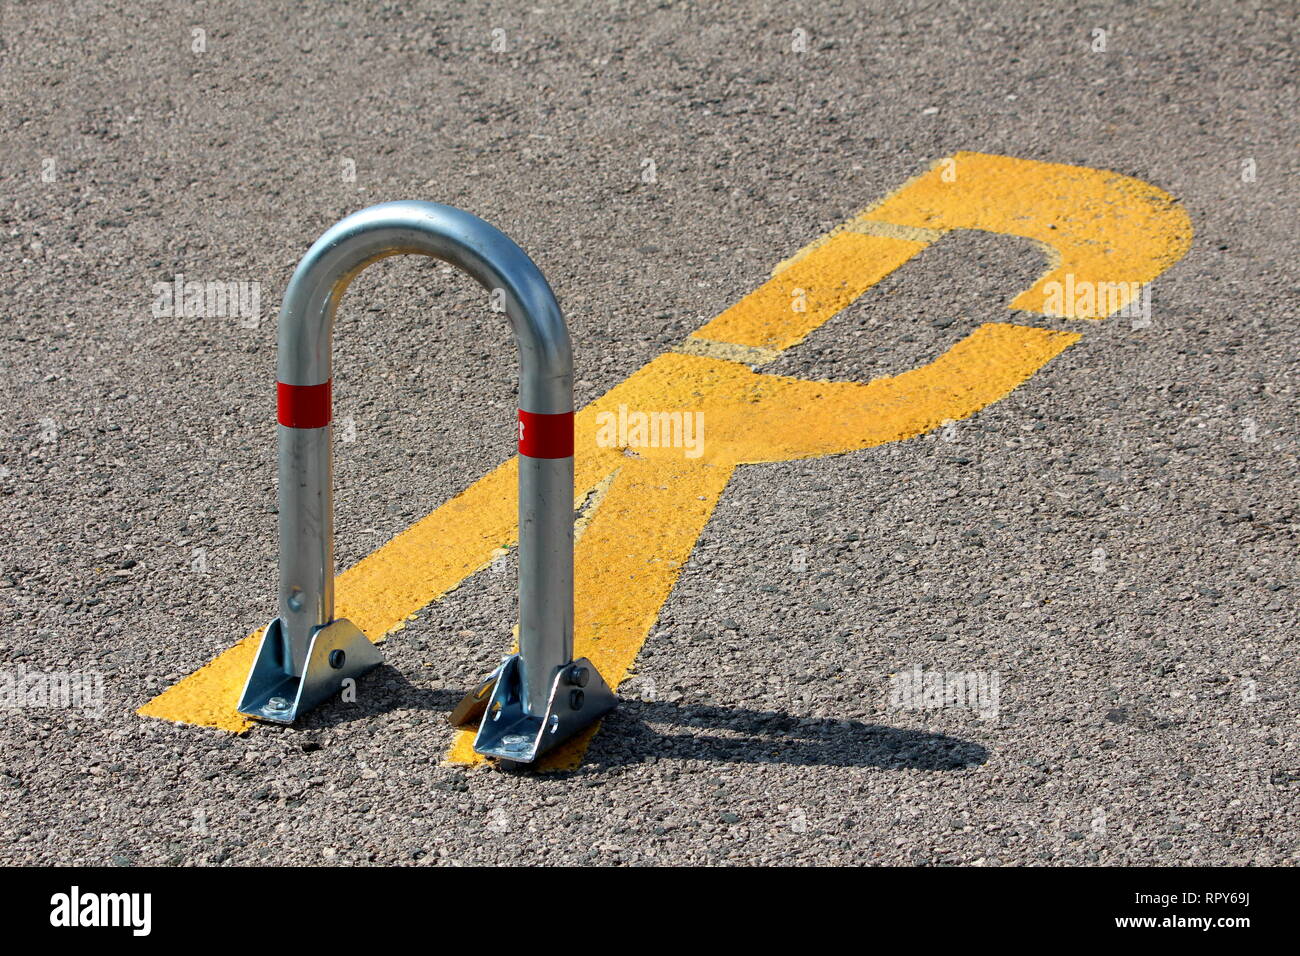 Shiny metal fold down vehicle security car parking lock safety barrier  mounted on paved parking lot with reserved sign painted on asphalt Stock  Photo - Alamy